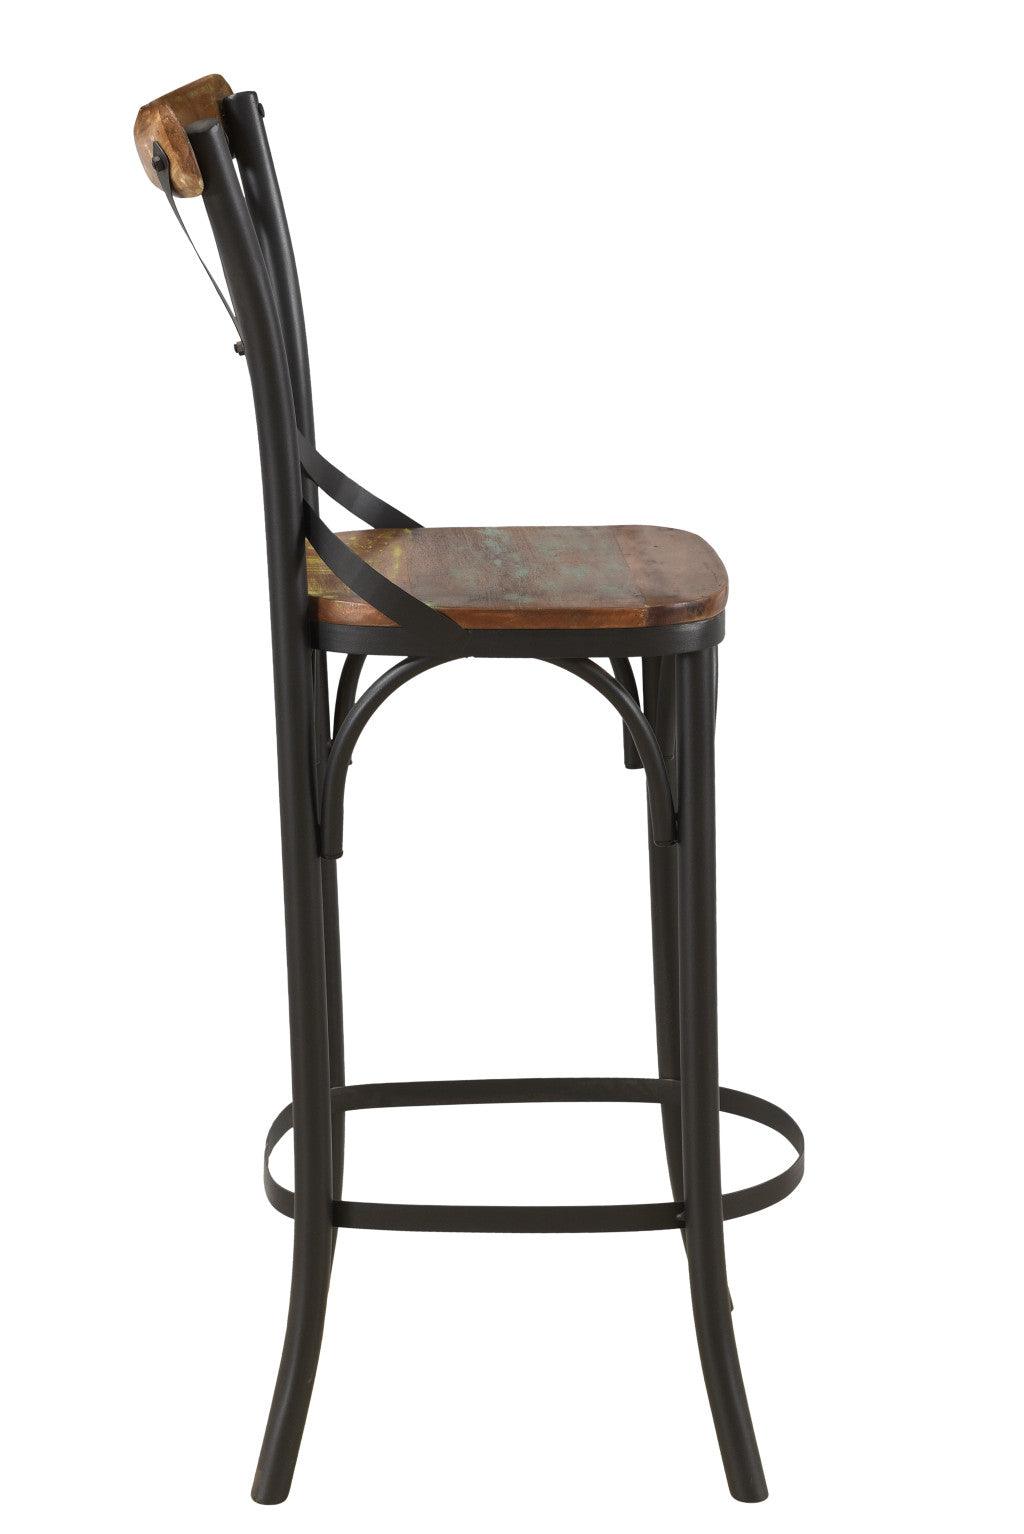 30" Brown And Black Metal Counter Height Bar Chair - FurniFindUSA